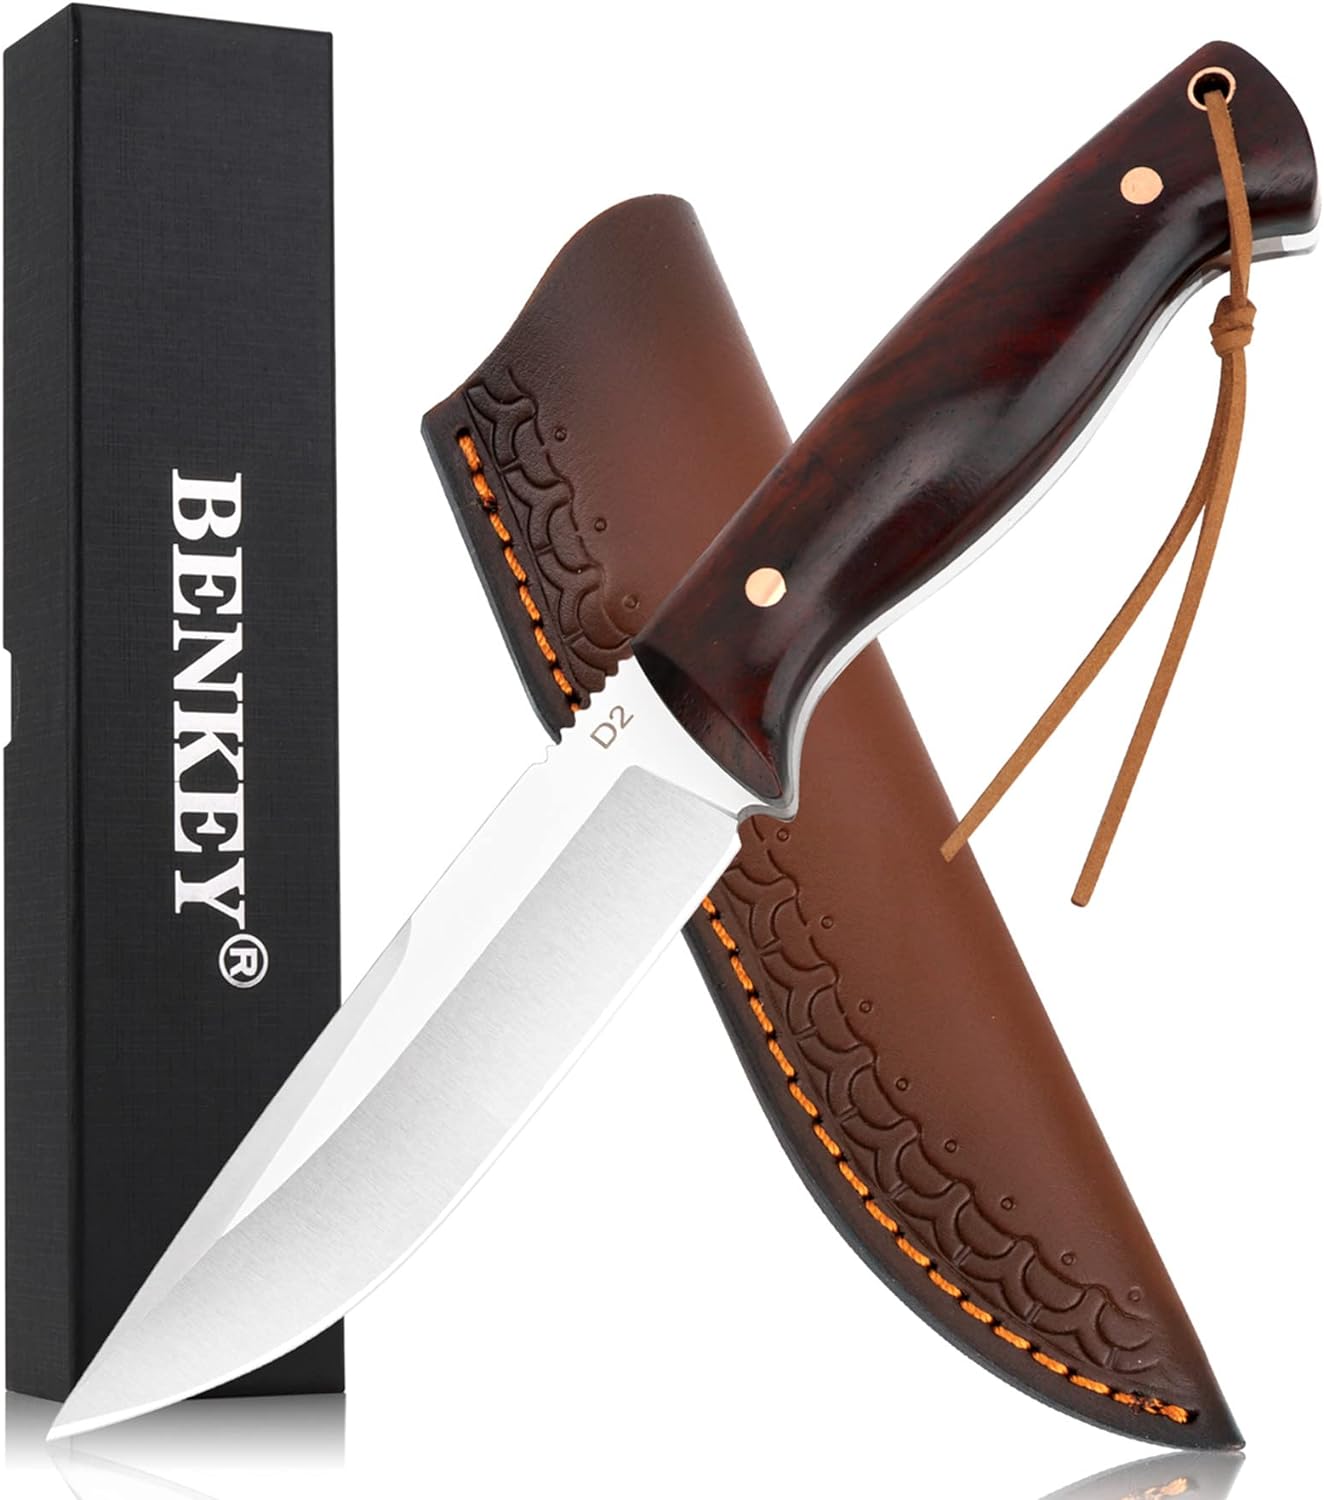 KD Hunting Knife Sharp Blade Knife for Camping Outdoor with Leather Sheath